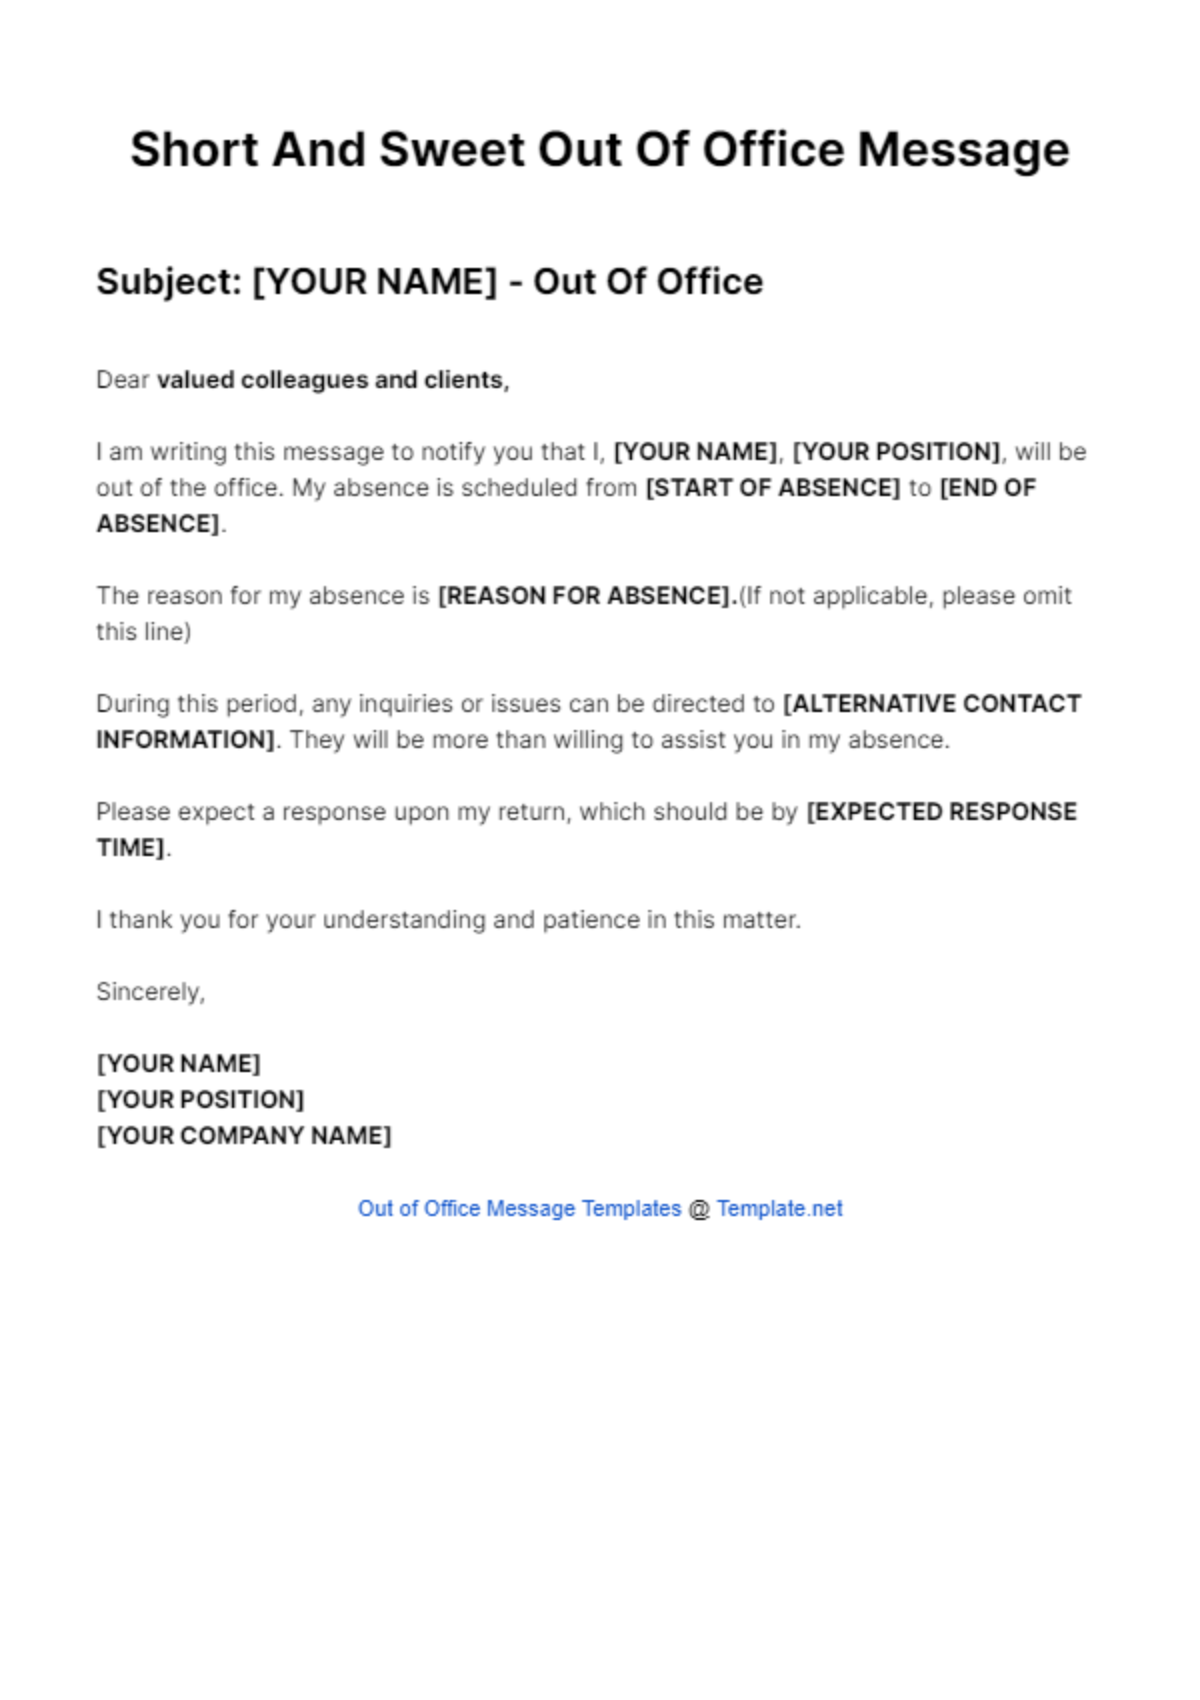 Short And Sweet Out Of Office Message Template